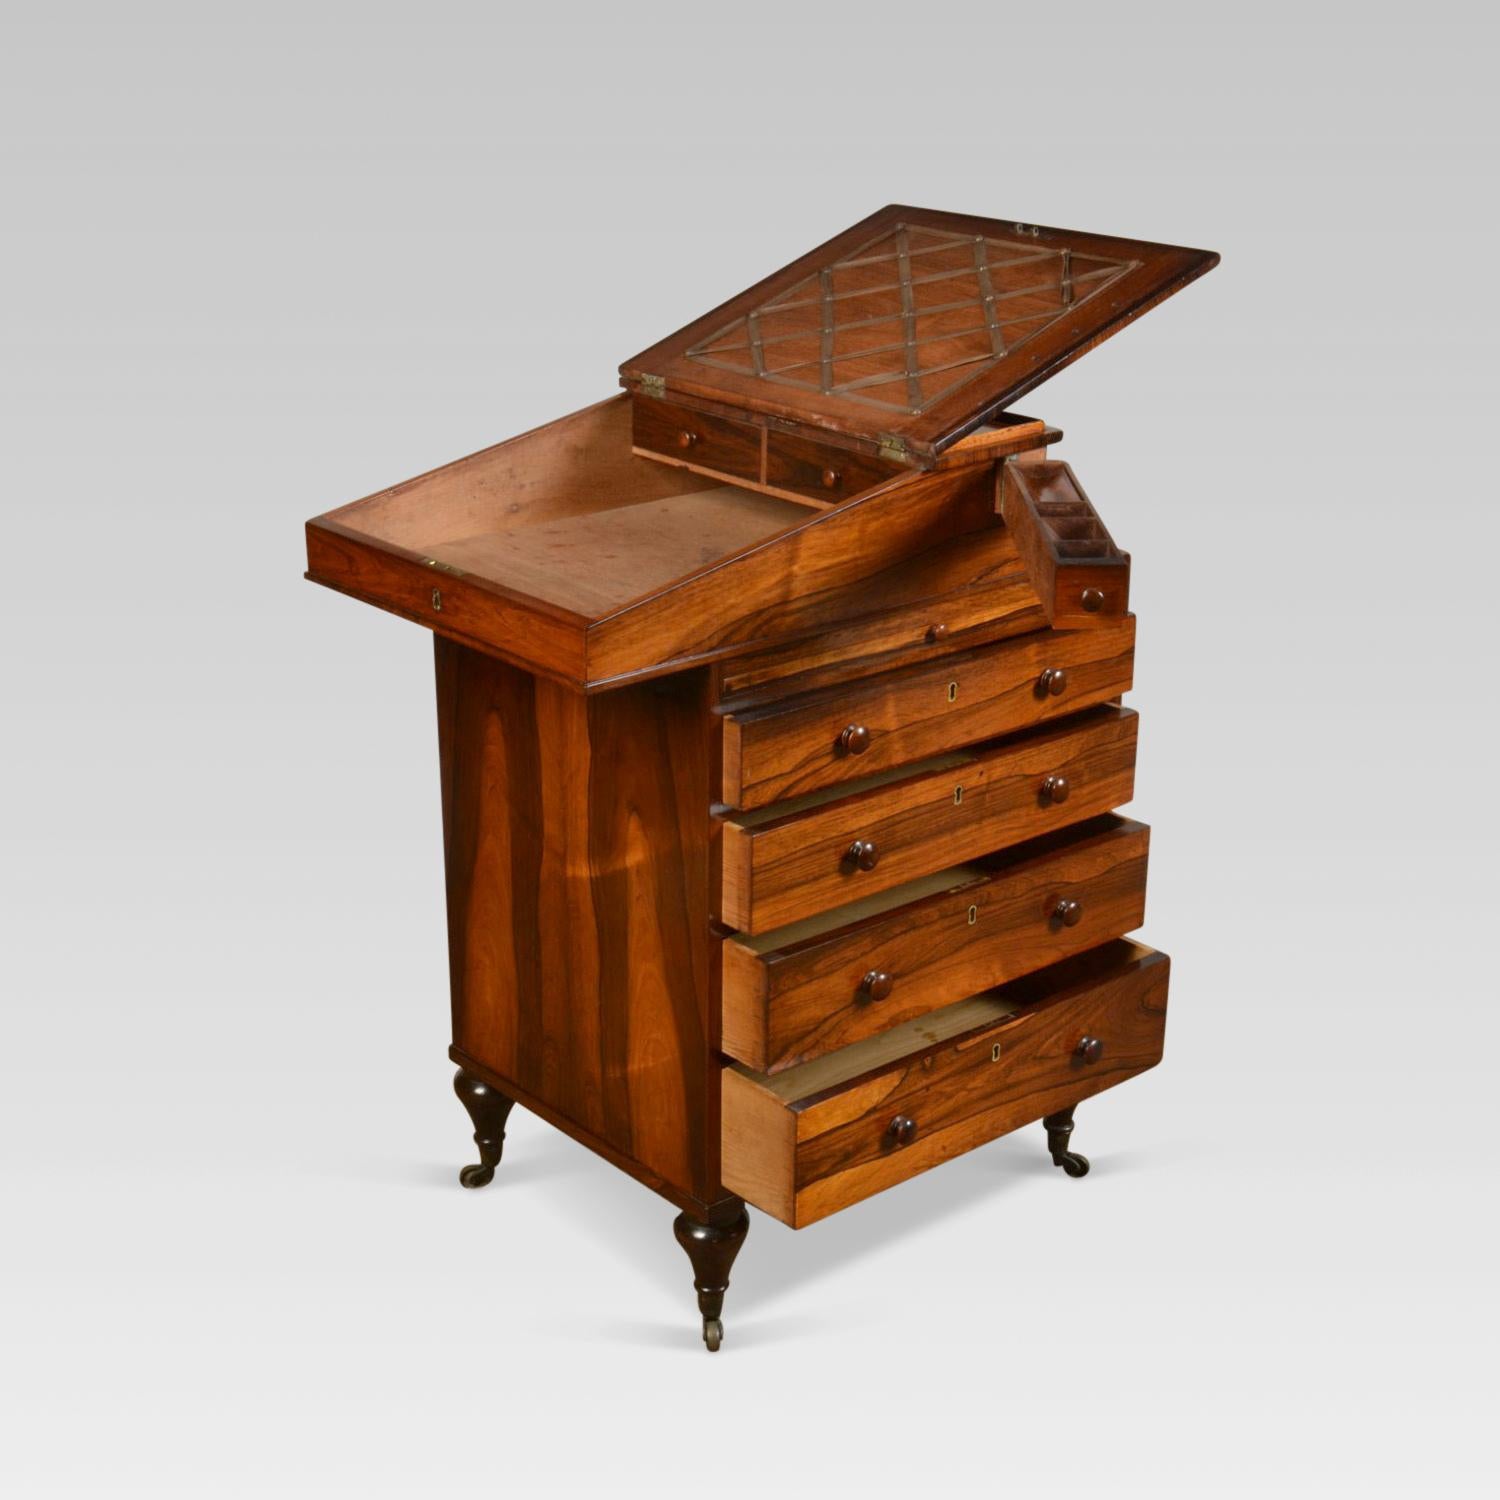 George IV Davenport the top with thin rosewood inset rail, slope fronted burgundy tooled leather lined writing surface, the interior with two small drawers, with 